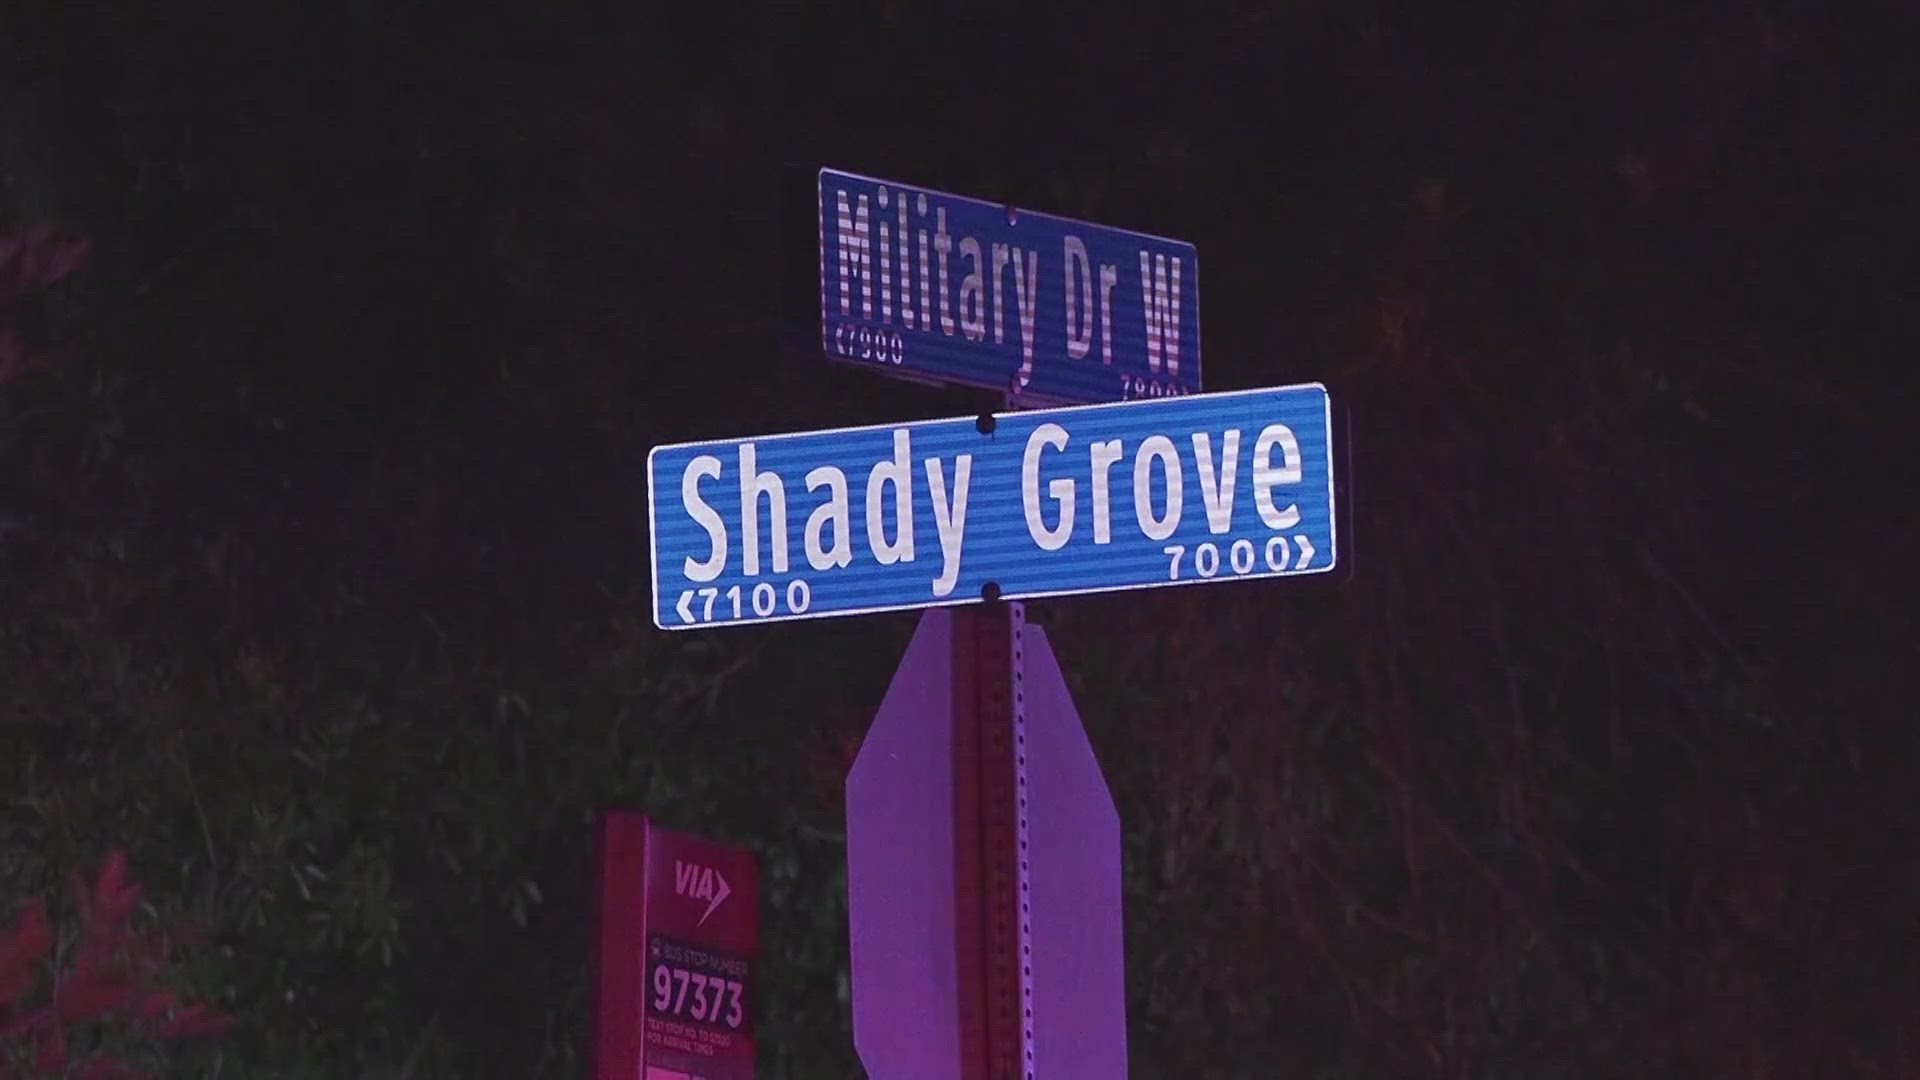 Officers responded around midnight to a home on Shady Grove Drive, near Military Drive.